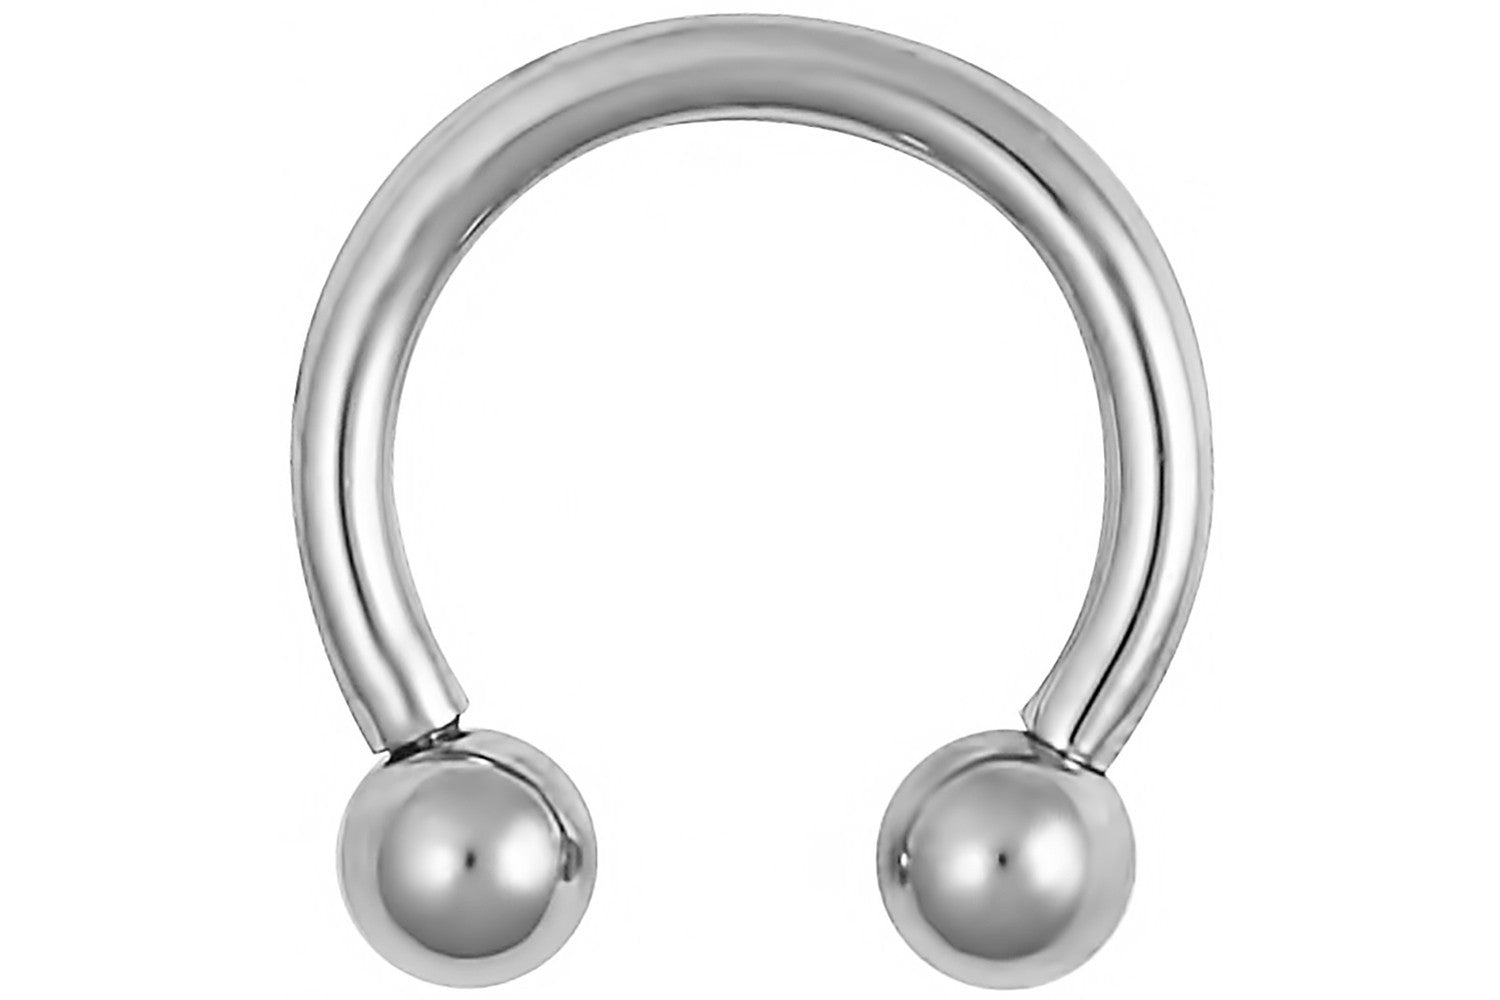 This 16 gauge 5/16" (8 mm) septum horseshoe ring is made with surgical grade 316L stainless steel. Surgical (Stainless) Steel is fully bio-compatible & hypoallergenic, making it one of the safest materials for body jewelry. This ring has 3 mm balls and is internally threaded for extra comfort during insertion.